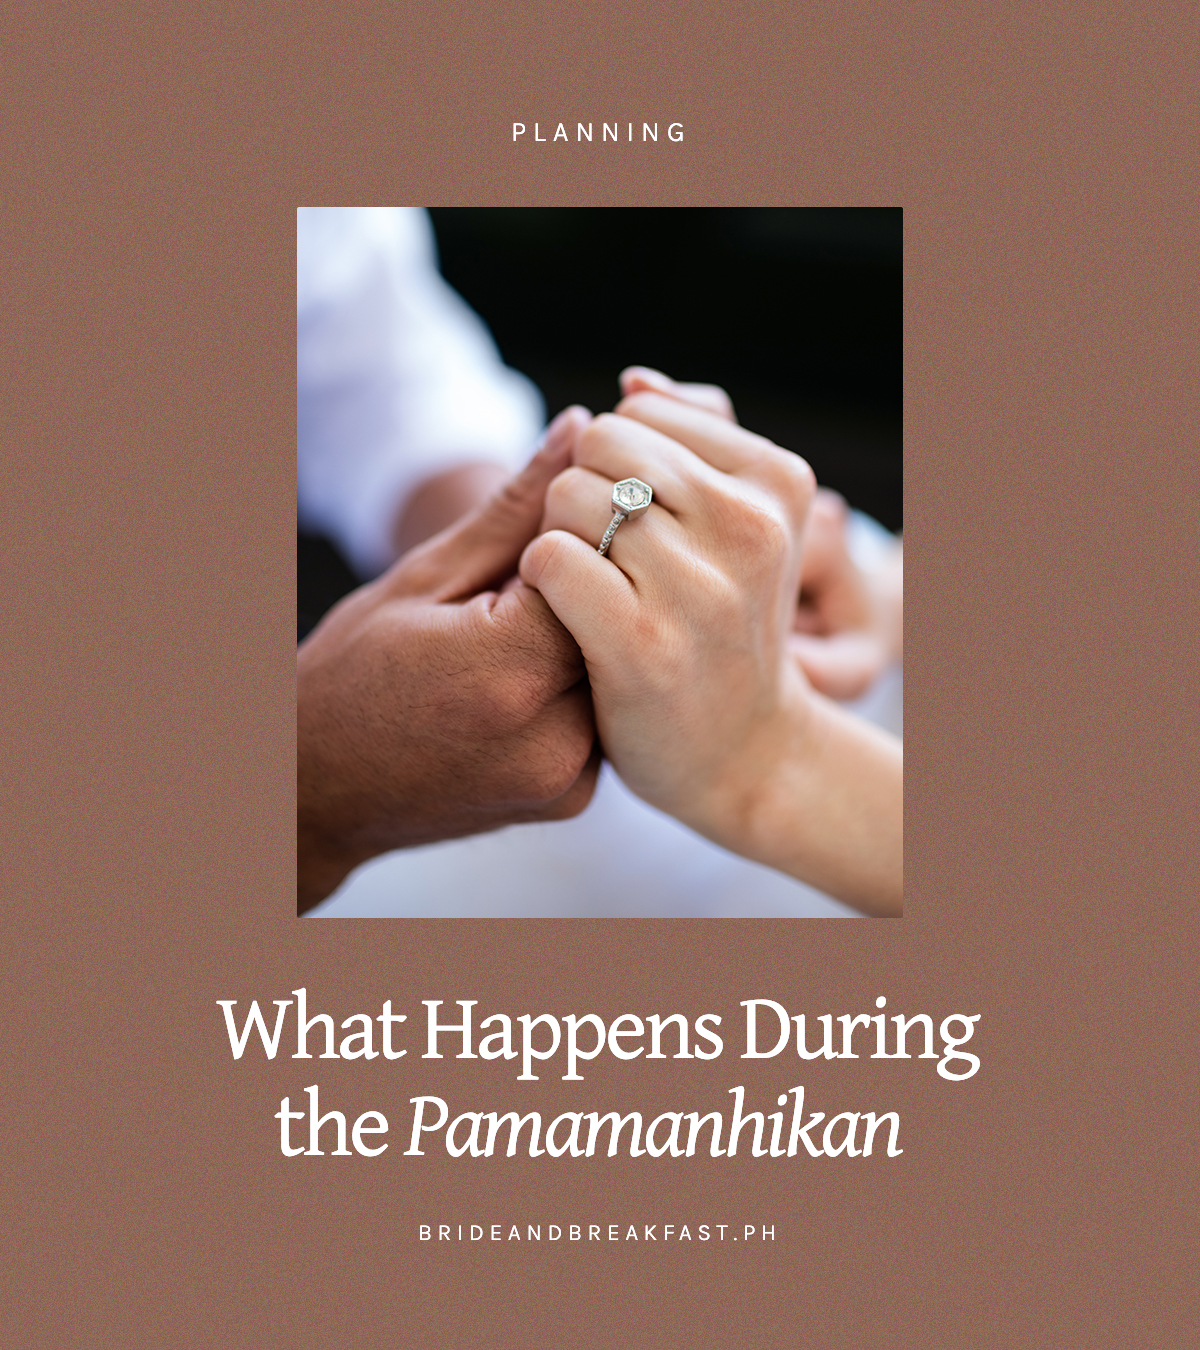 What Happens During the Pamamanhikan